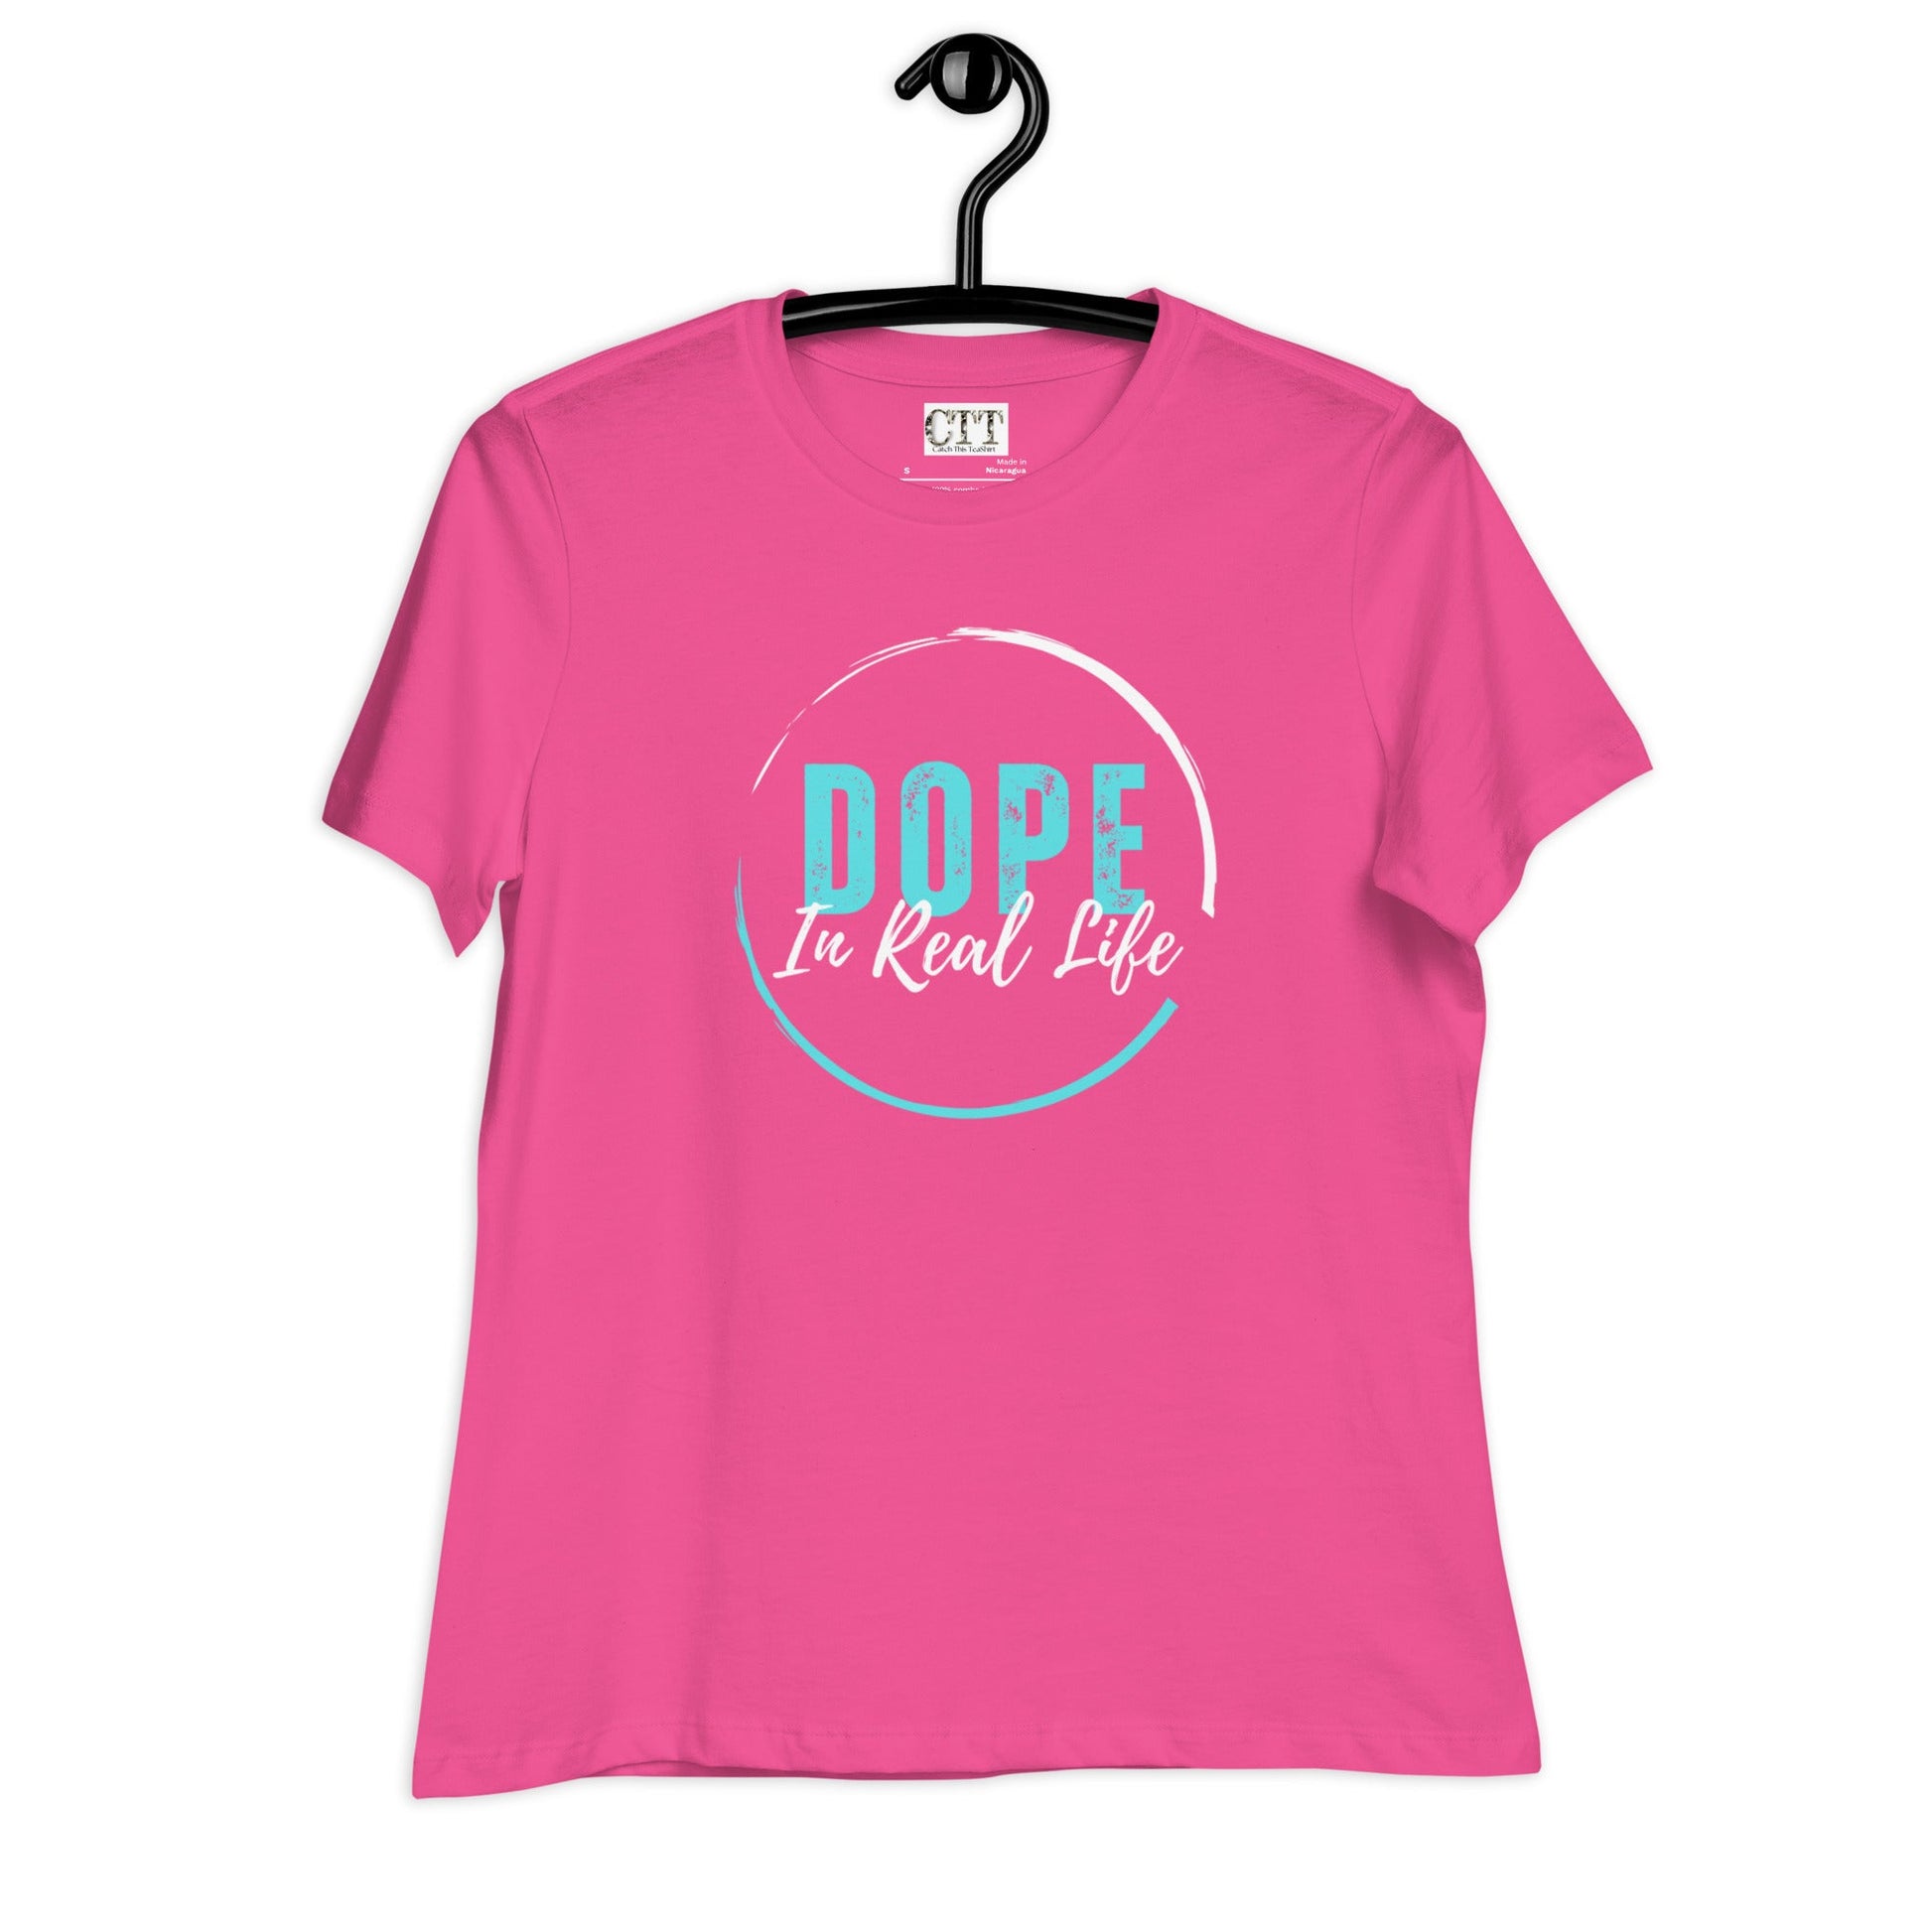 Dope In Real Life Women's Relaxed T-Shirt - Catch This Tea Shirts